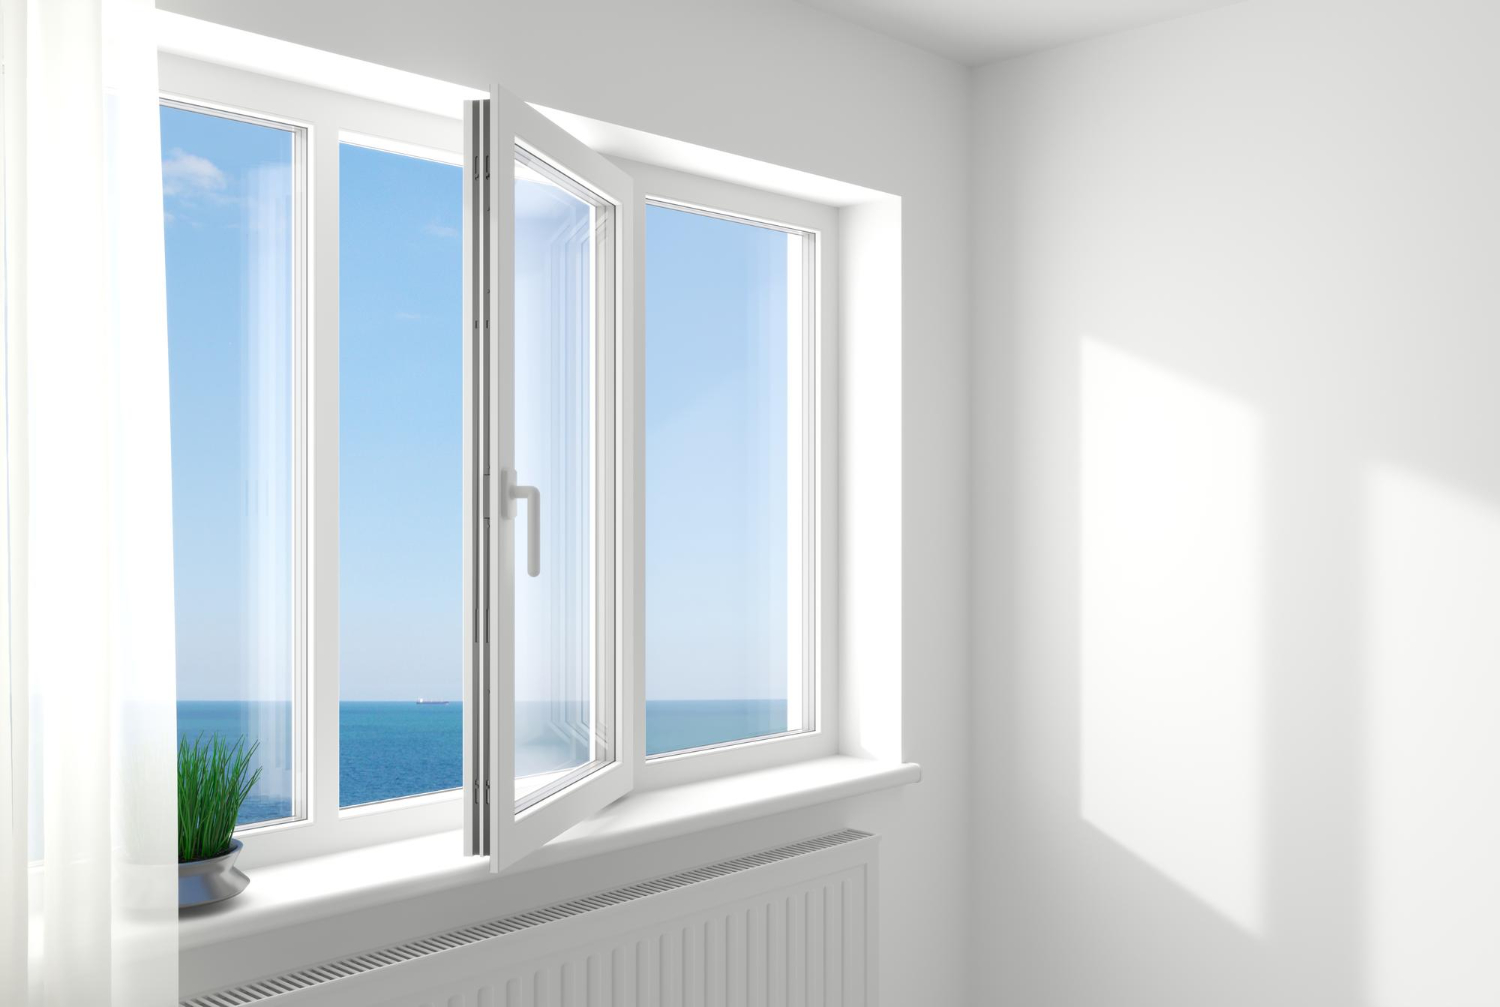 Exploring the Pros and Cons of Double-Glazed Windows